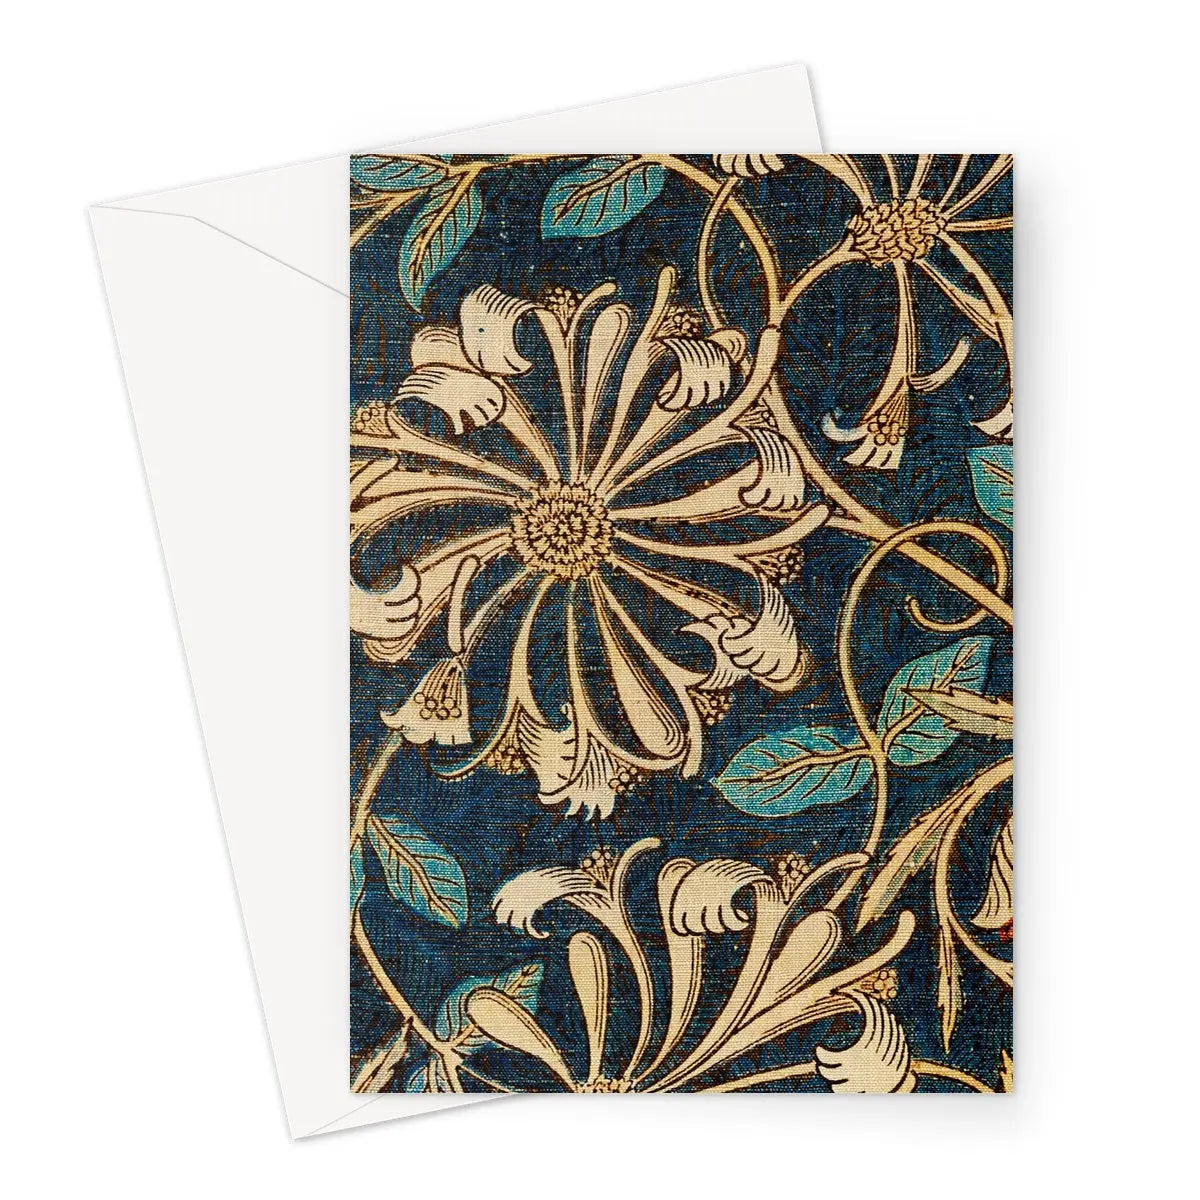 Honeysuckle 3 By William Morris Greeting Card - A5 Portrait / 10 Cards - Greeting & Note Cards - Aesthetic Art